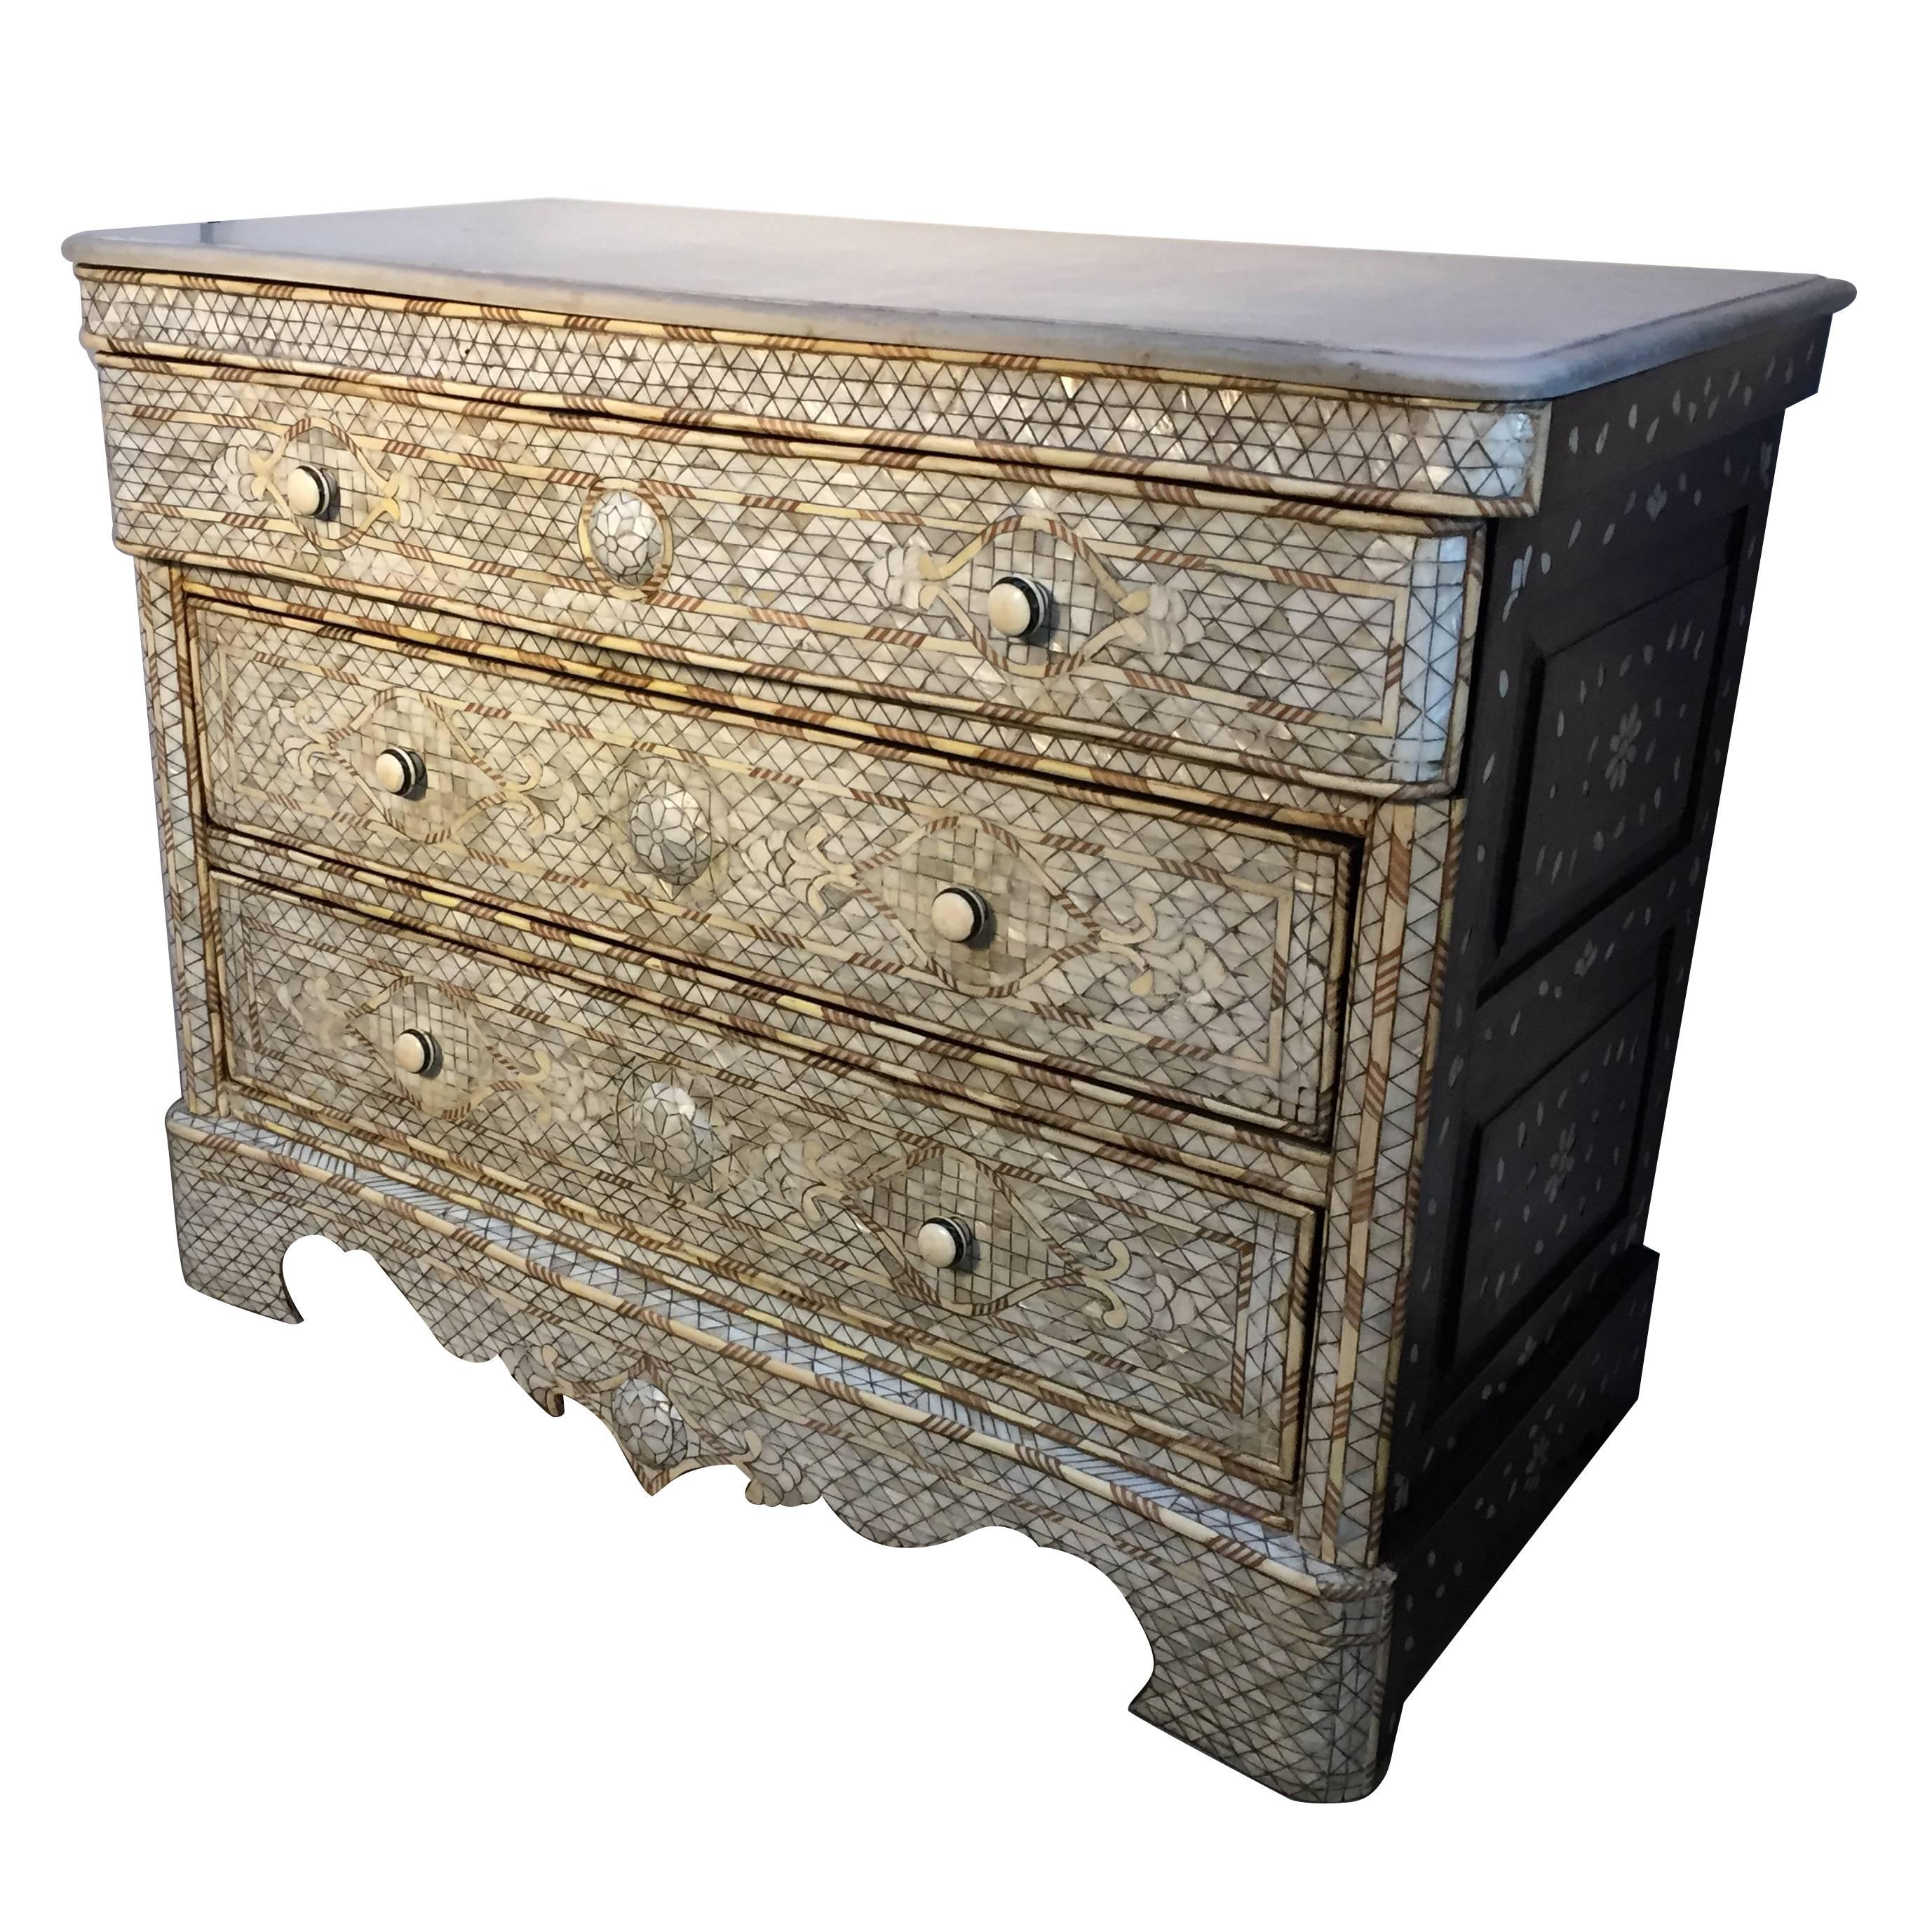 Fabulous Middle Eastern Syrian art work, handcrafted white wedding dresser with three drawers, wood inlay with mother-of-pearl, shell and bone. Moorish arches and intricate Islamic designs. 
Dowry chest of drawers heavily inlaid in front, the sides